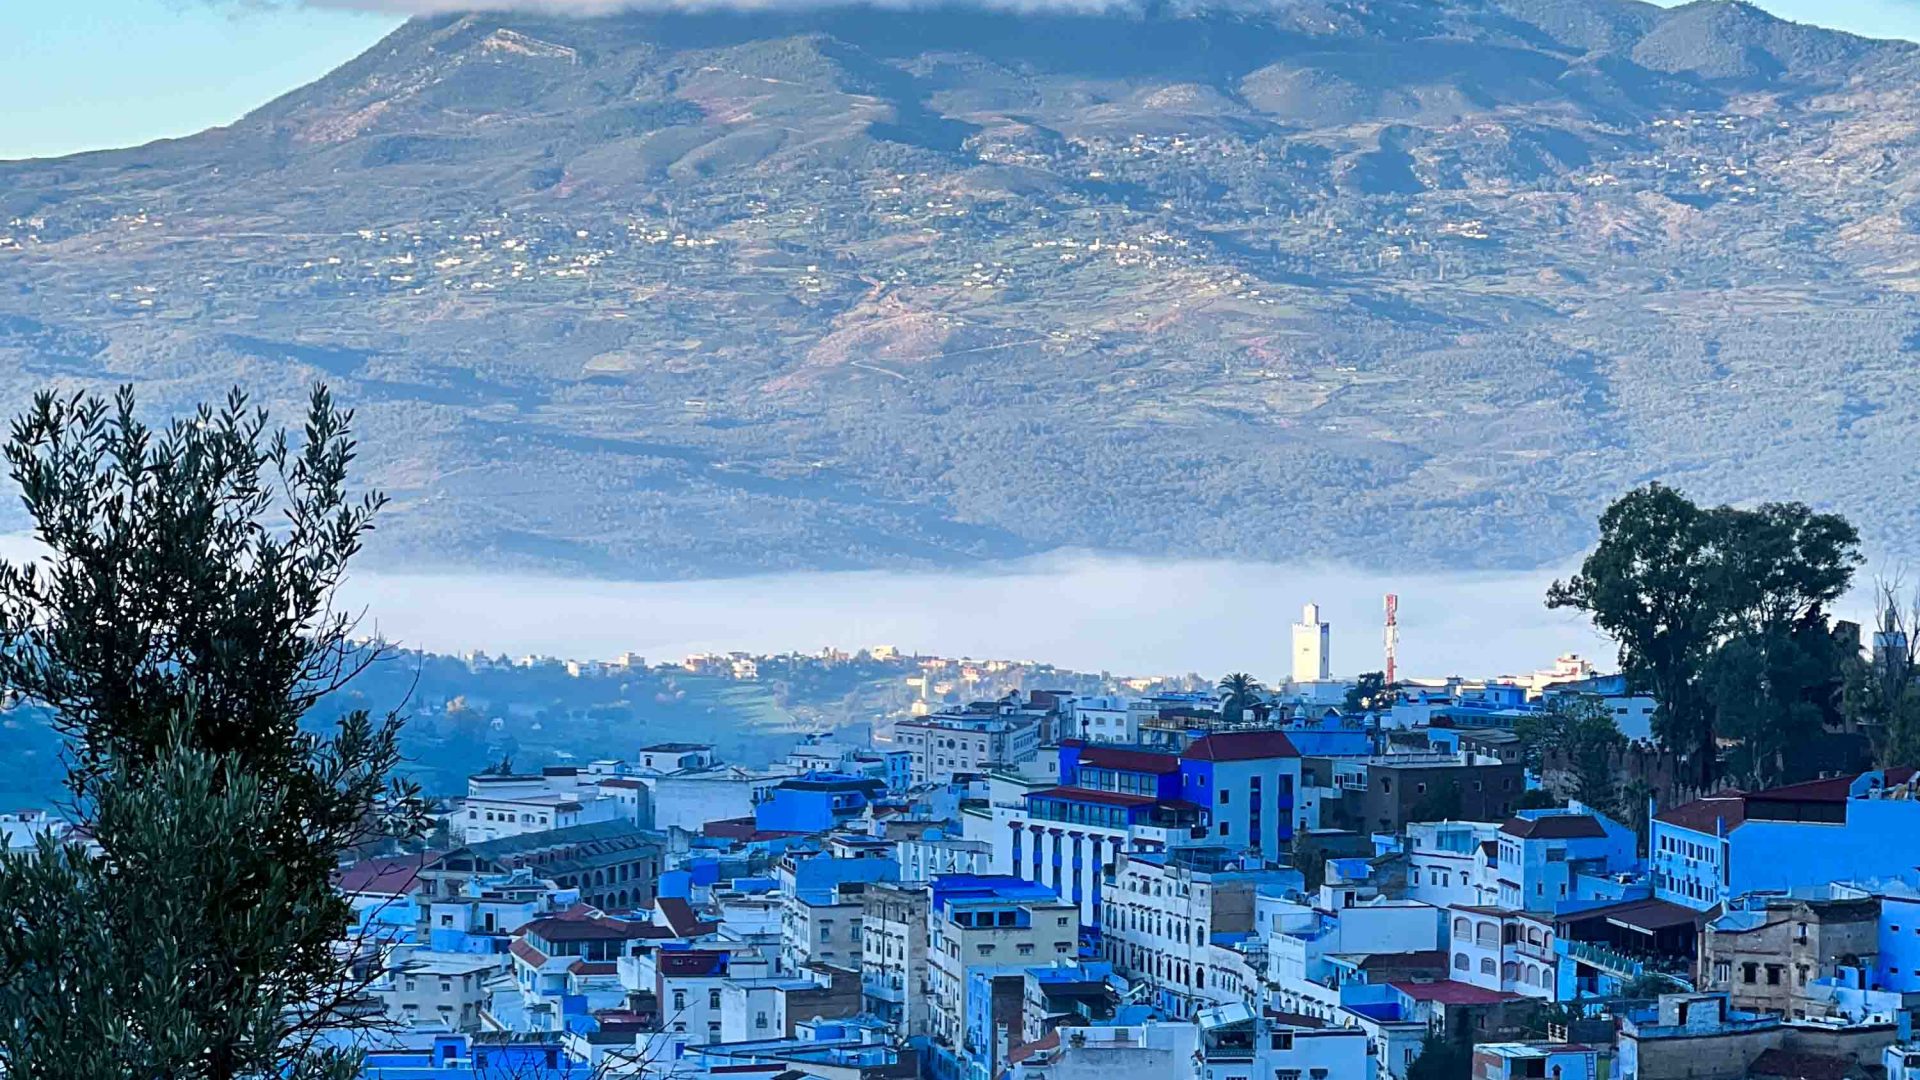 A view from above of the Moroccan town of Sunrise over Chefchaouen with blue roofs by the lake and mountains.